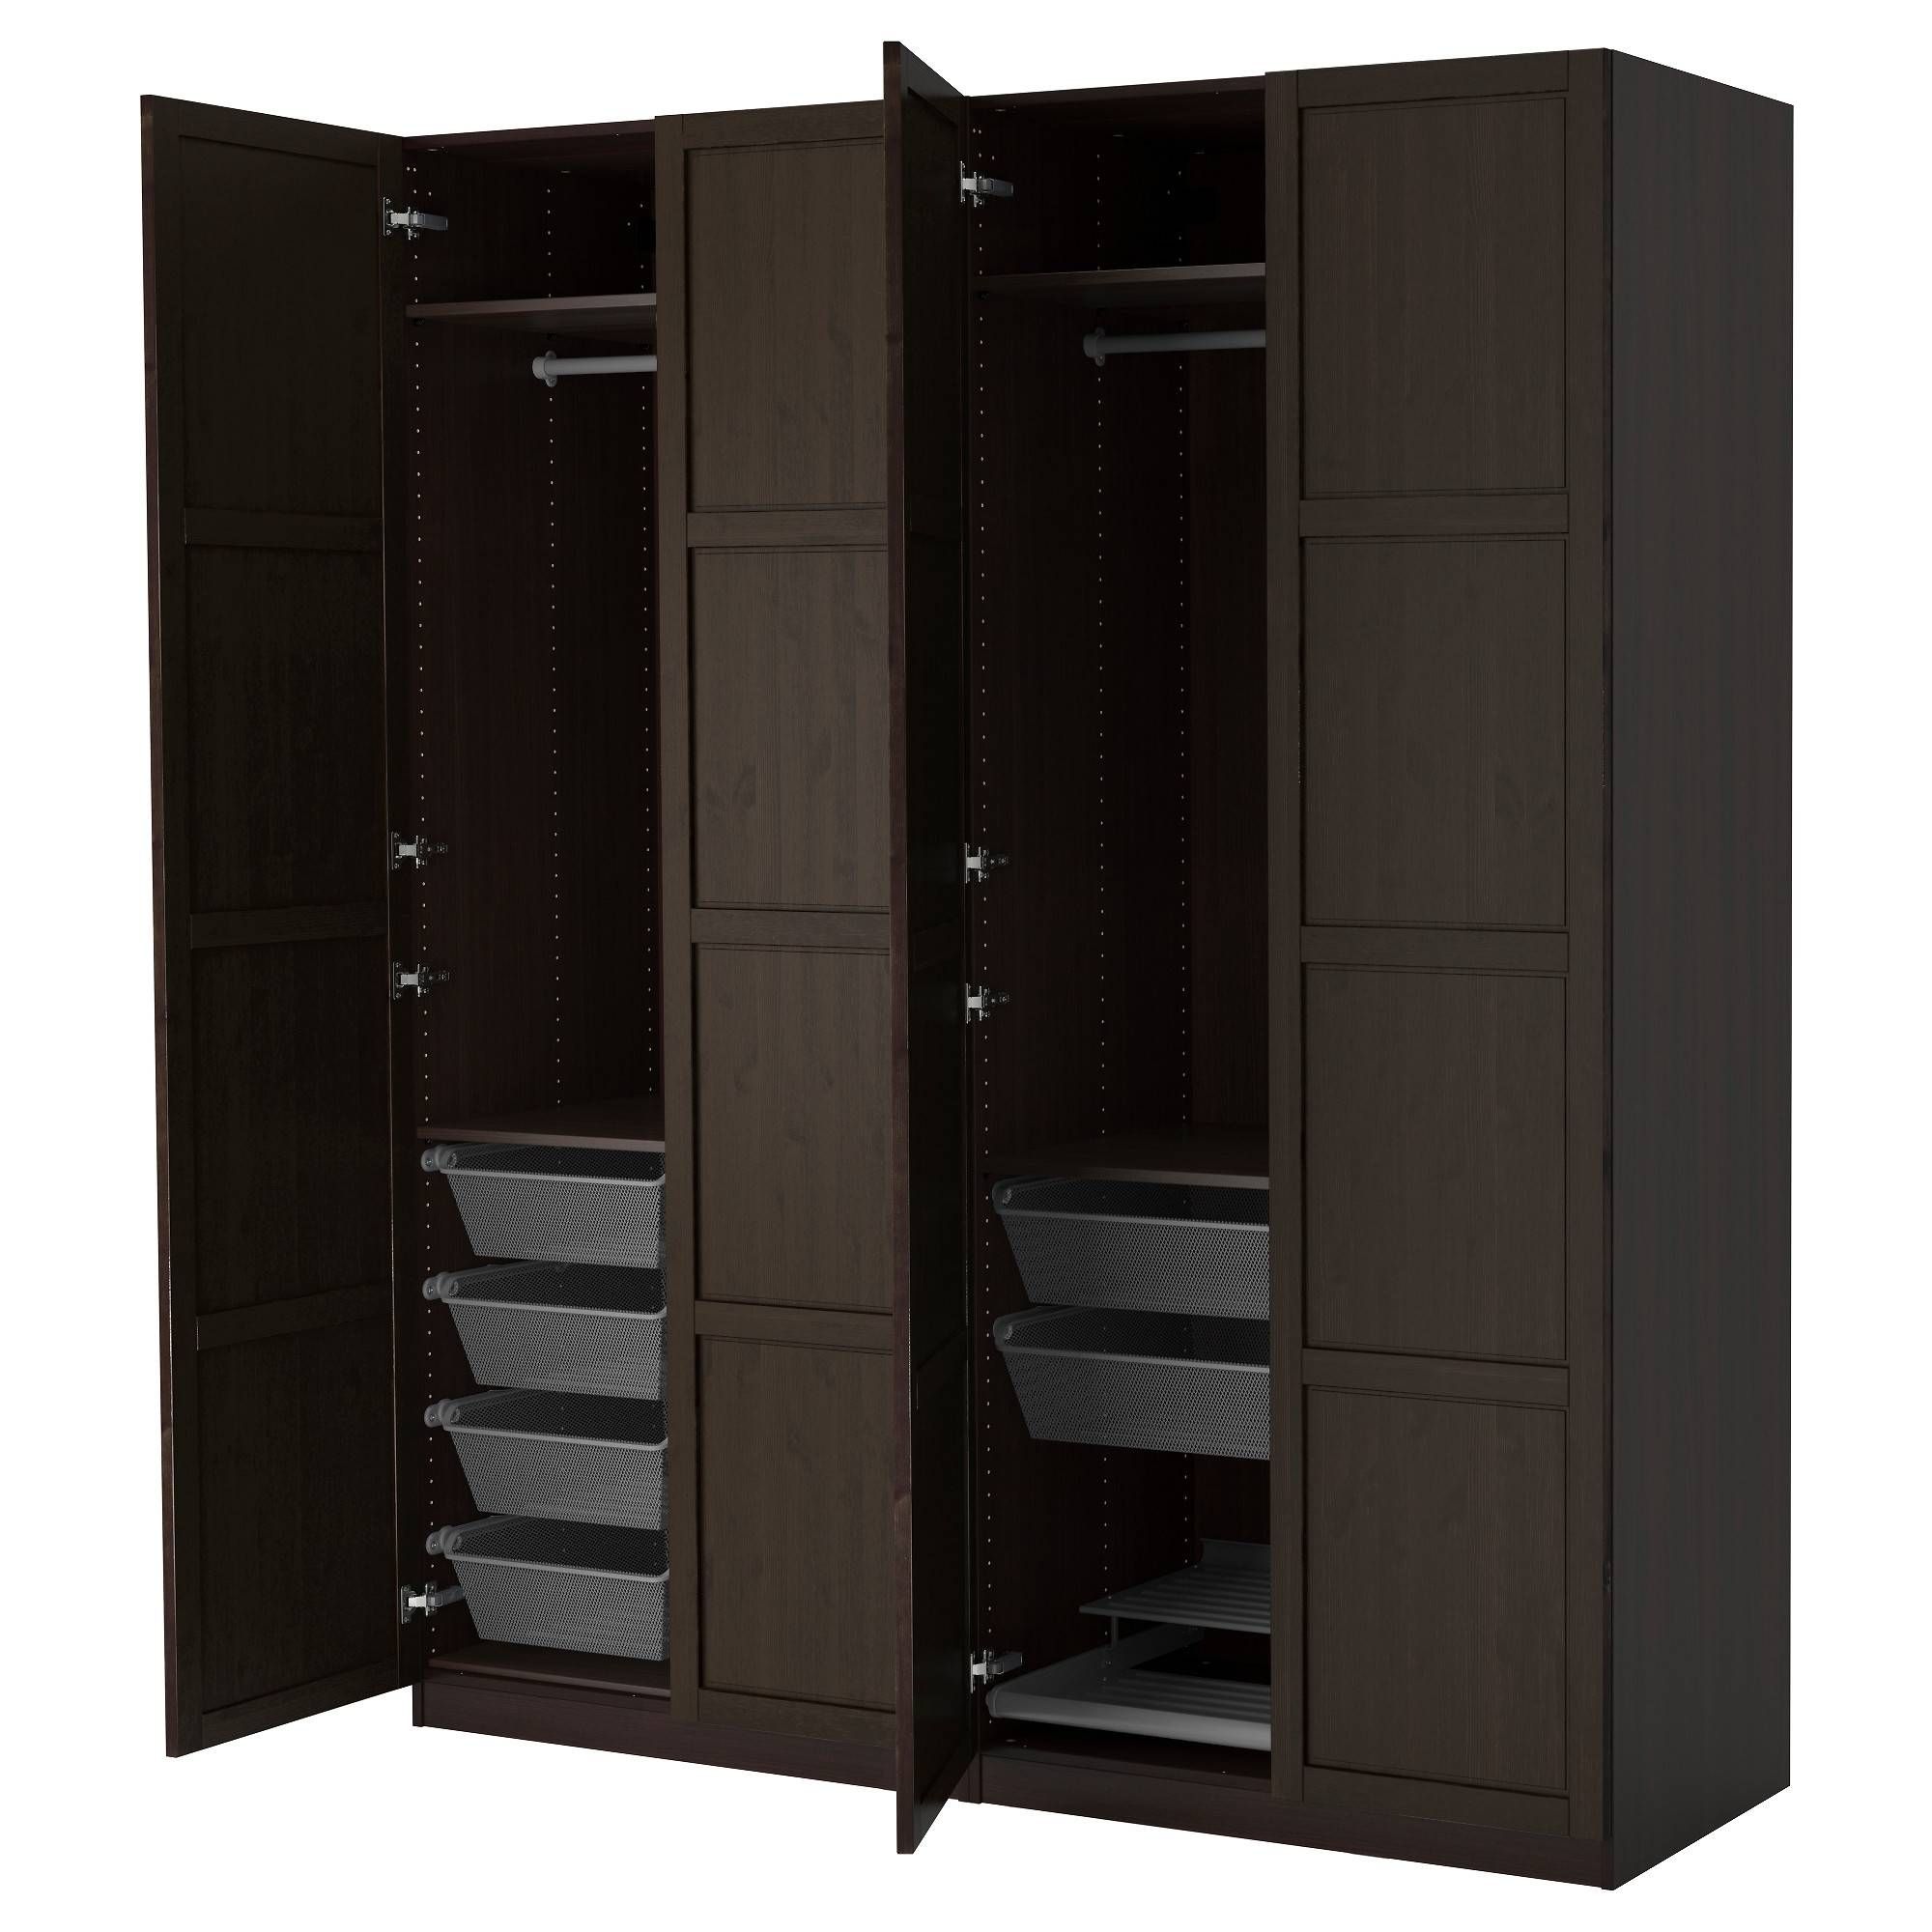 Wardrobes – Pax System – Ikea Throughout Wardrobe With Drawers And Shelves (View 25 of 30)